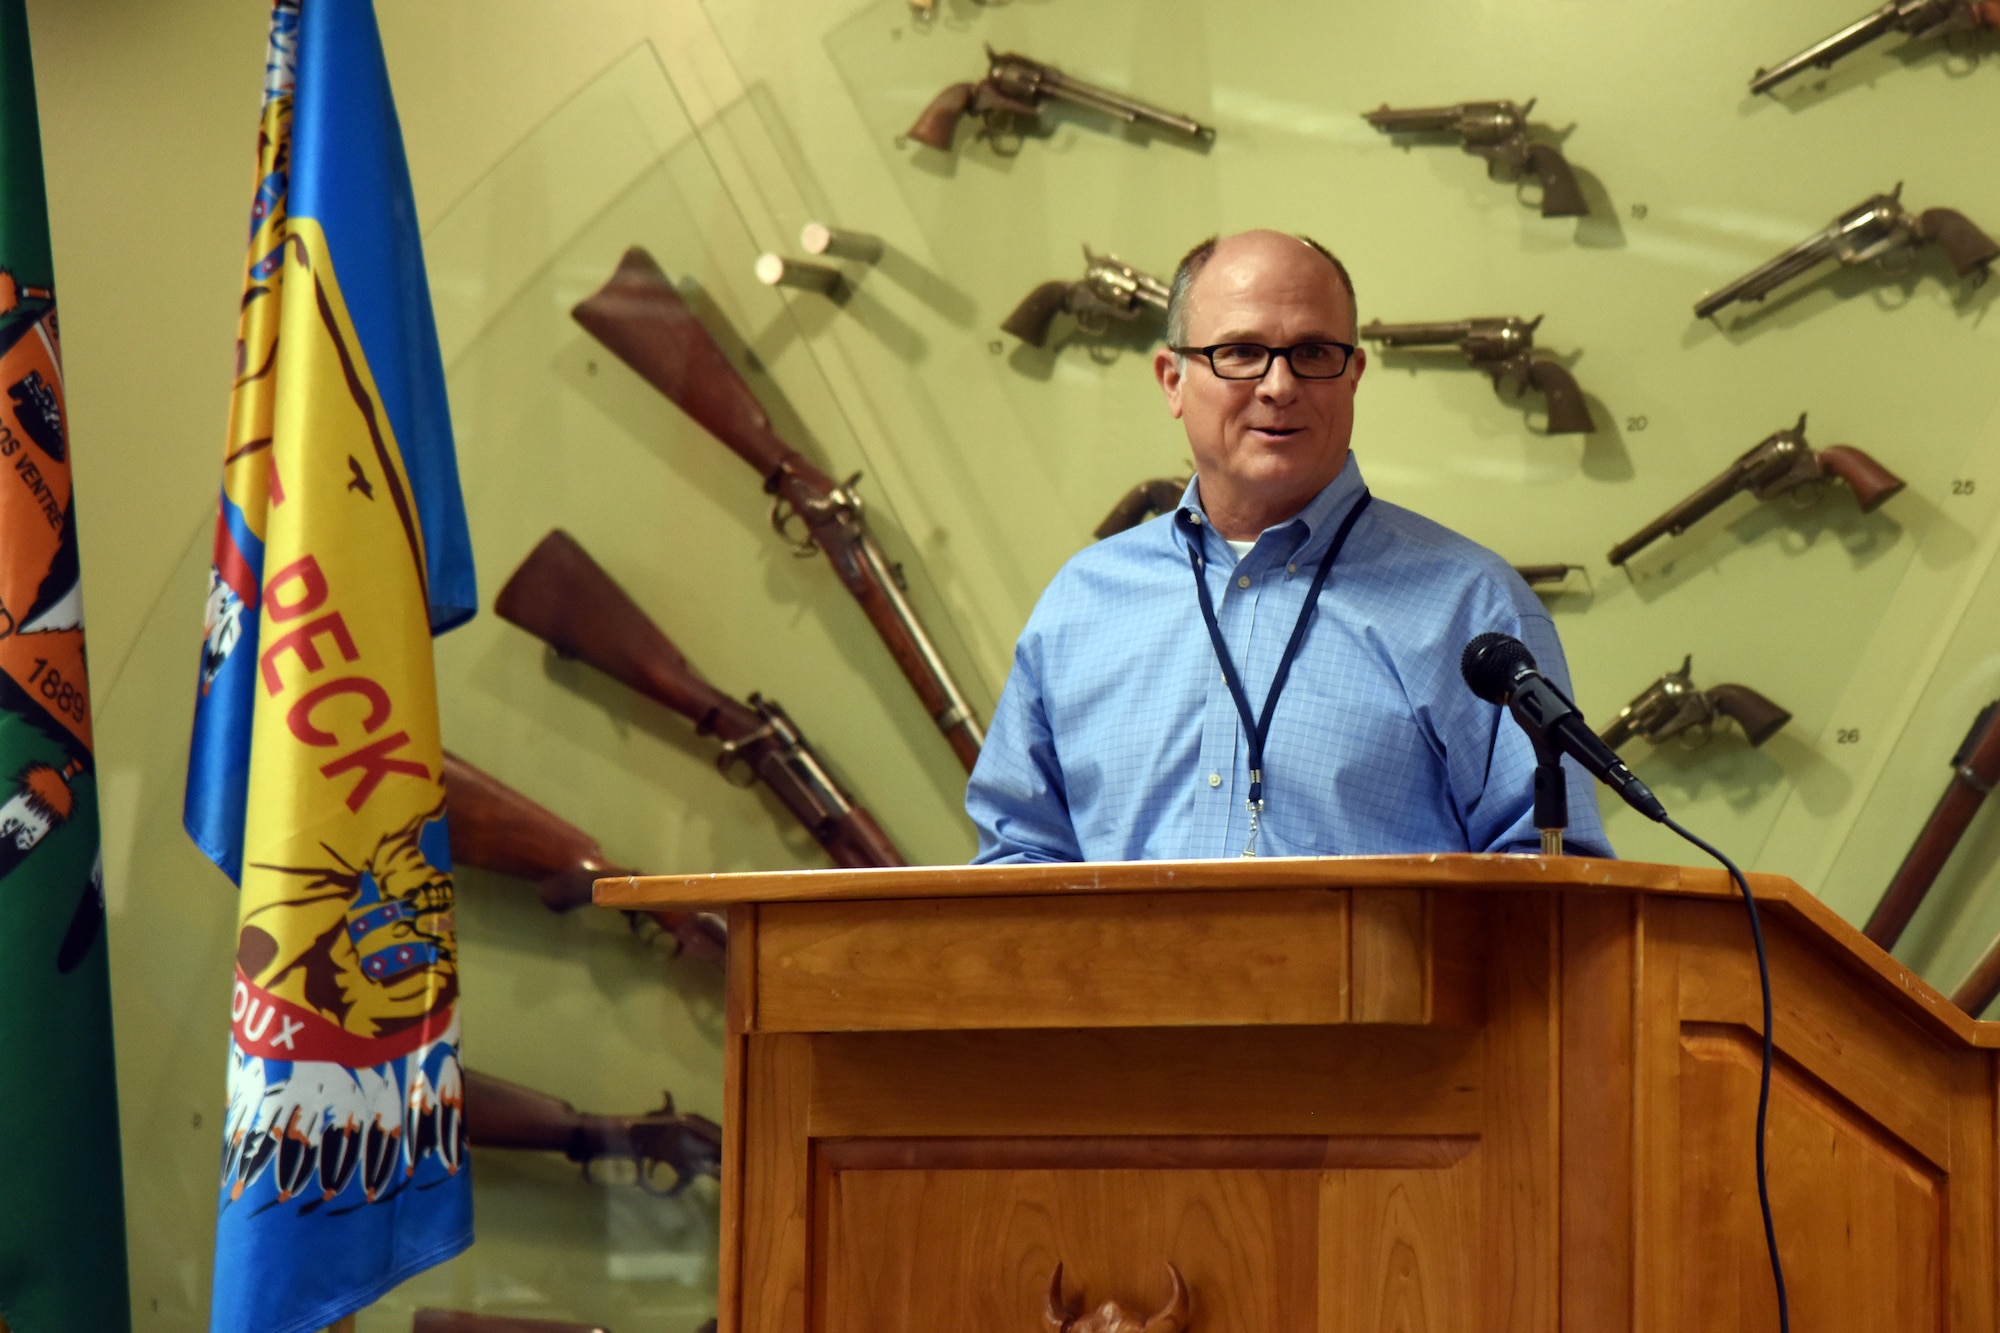 180712-F-UQ541-1162 Tony Lucas, 341st Missile Wing installation tribal liaison officer, kicks off the third annual tribal relations meeting July 12, 2018, in Great Falls, Mont. at the C.M. Russell Museum. The intergovernmental, daylong meeting was a mix of presentations and discussions, regarding federal actions that may affect tribal rights. (U.S. Air Force photo by Kiersten McCutchan)